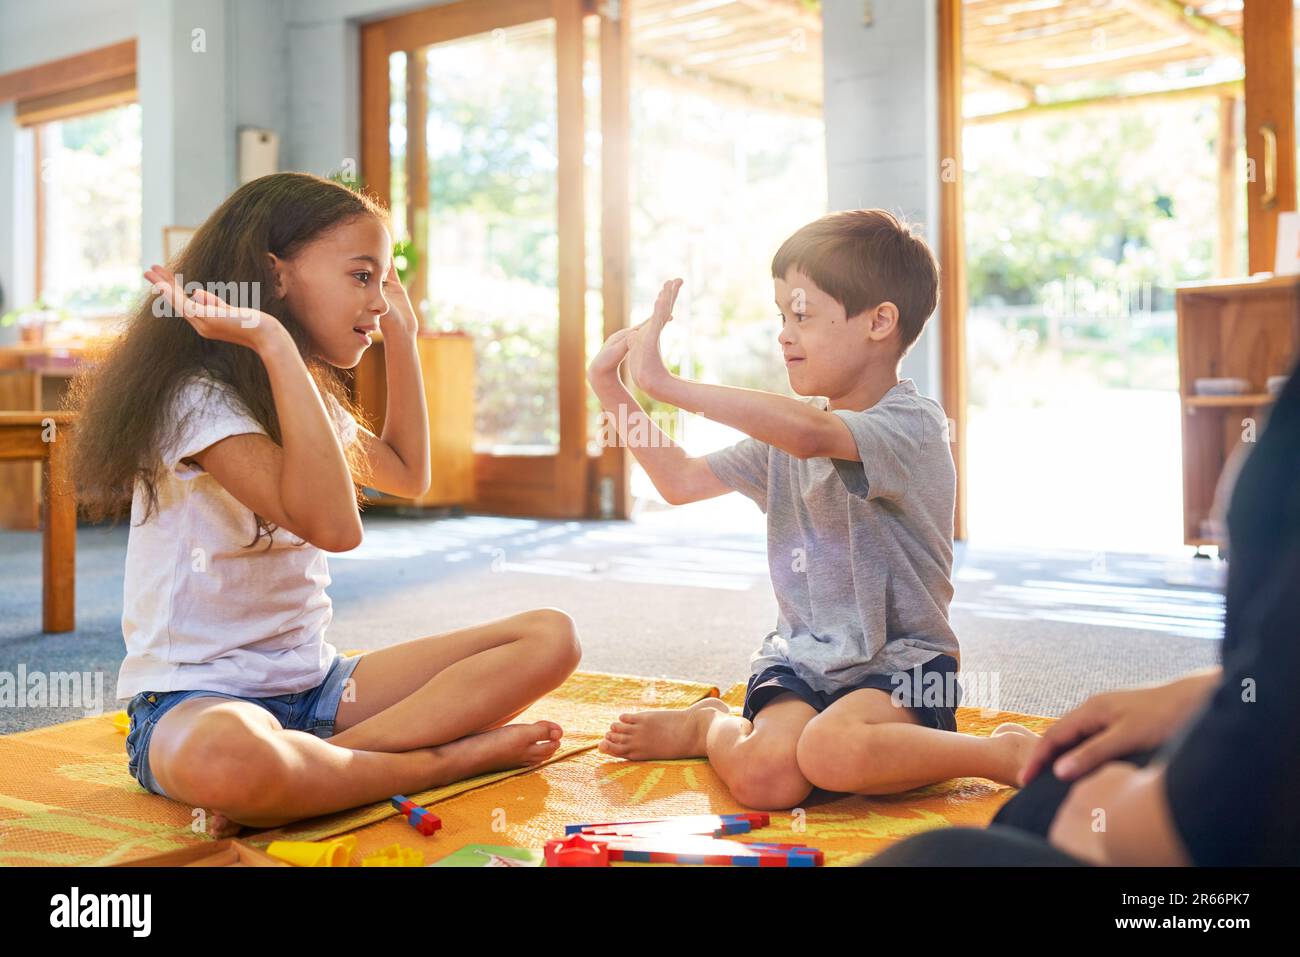 Sister playing clapping game with brother with Down Syndrome at home Stock Photo